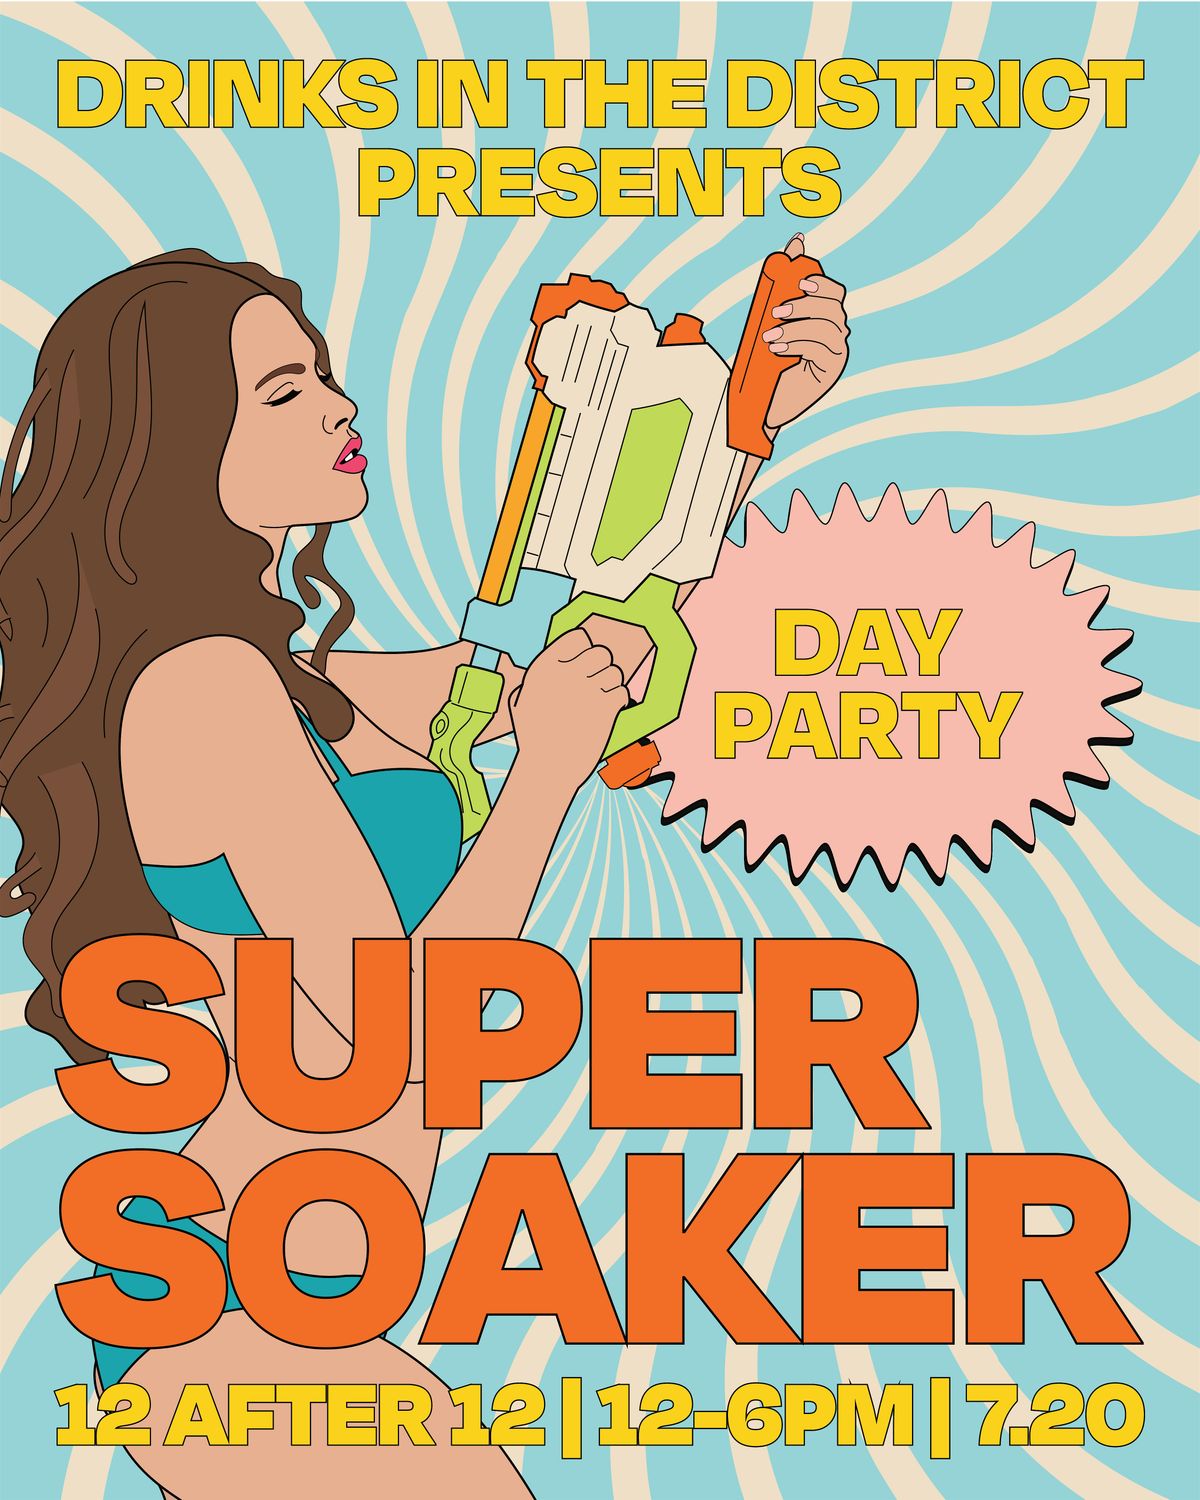 SUPER SOAKER 2: DC'S WETTEST DAY PARTY